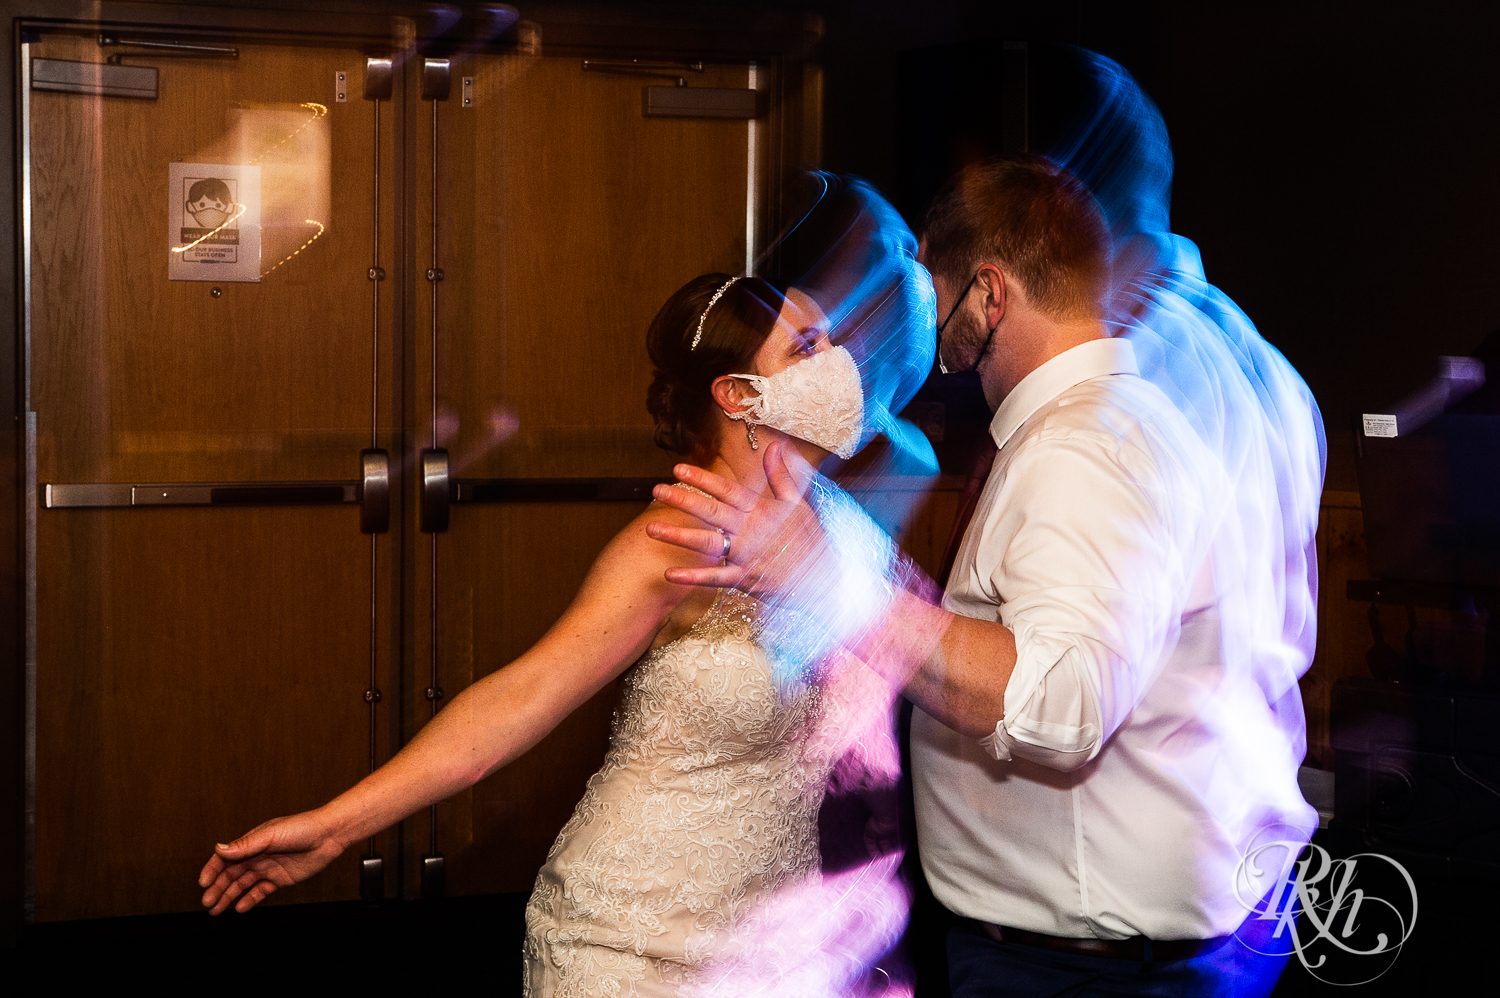 Guests dance with bride and groom at reception at Superior Shores Resort in Two Harbors, Minnesota.